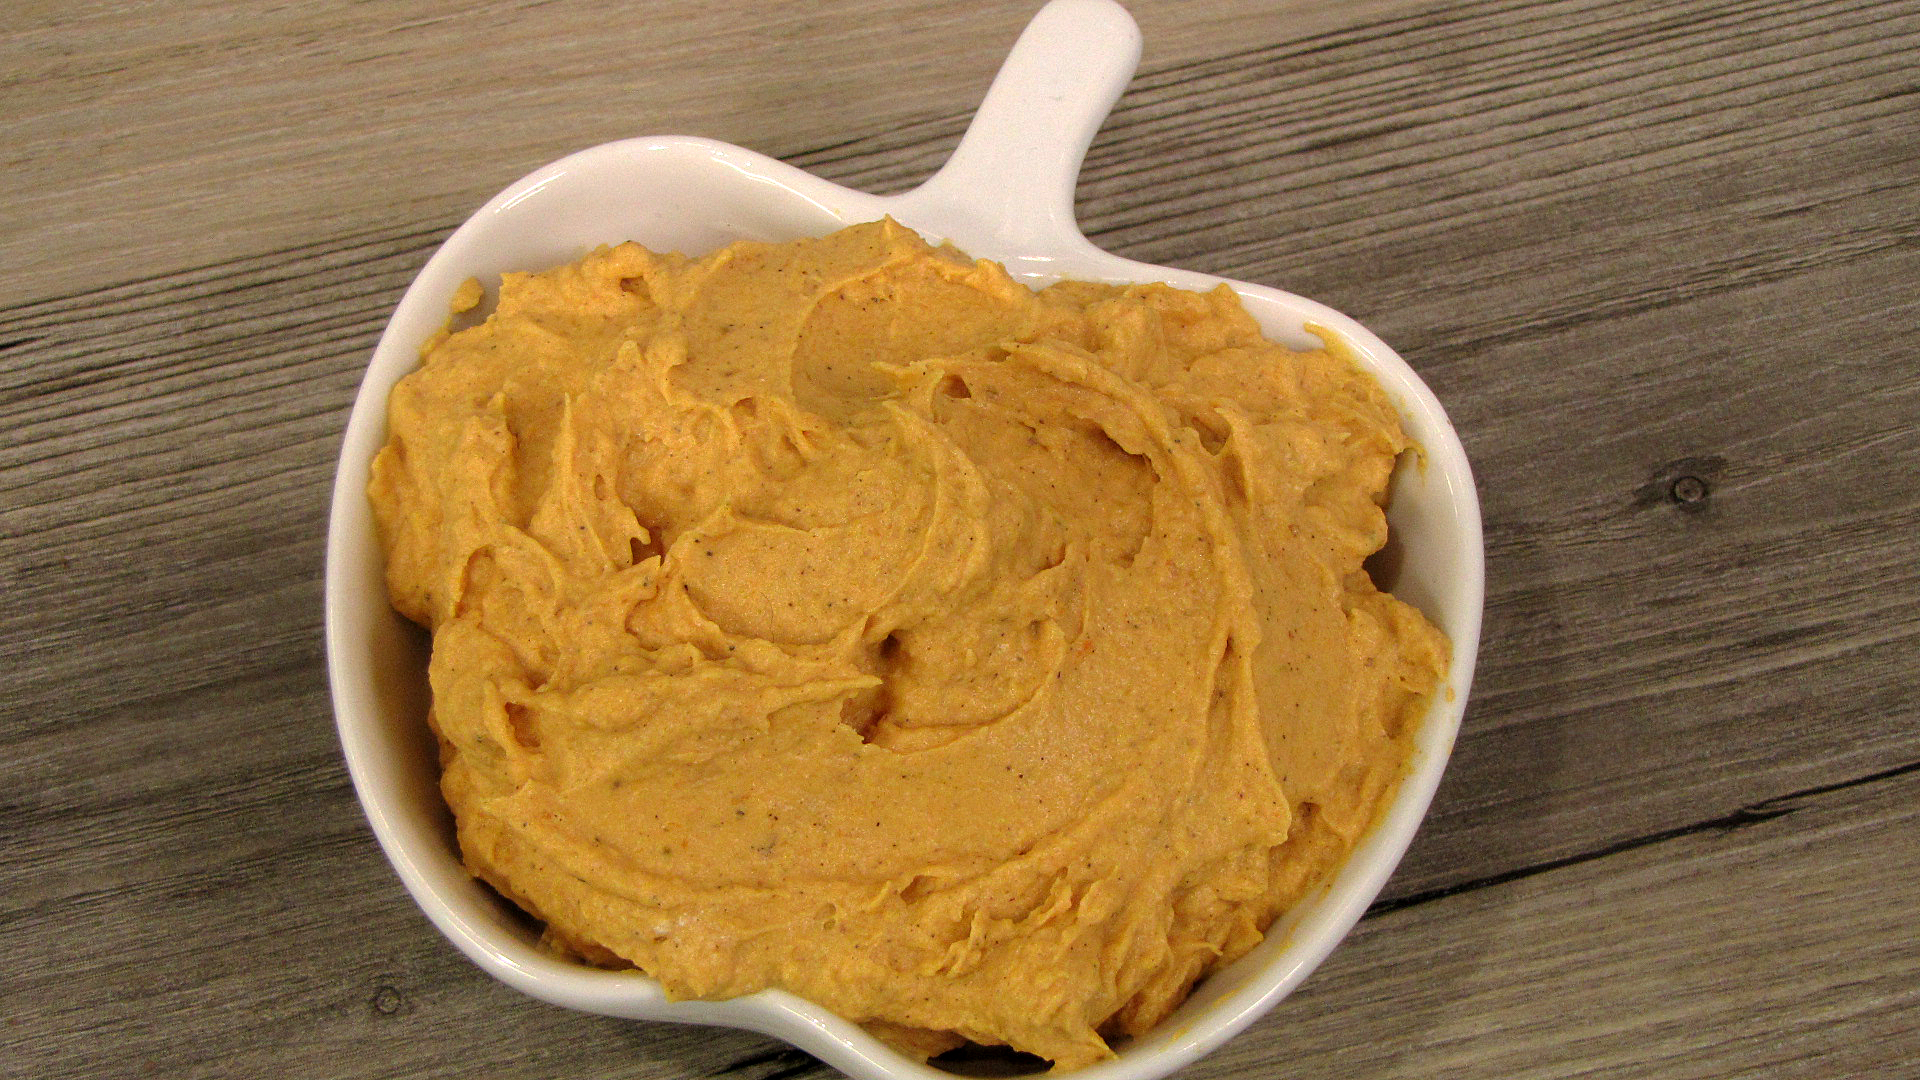 Serve this dip with graham crackers or crunchy apples for a seasonal treat after an evening of trick-or-treating. (NDSU photo)